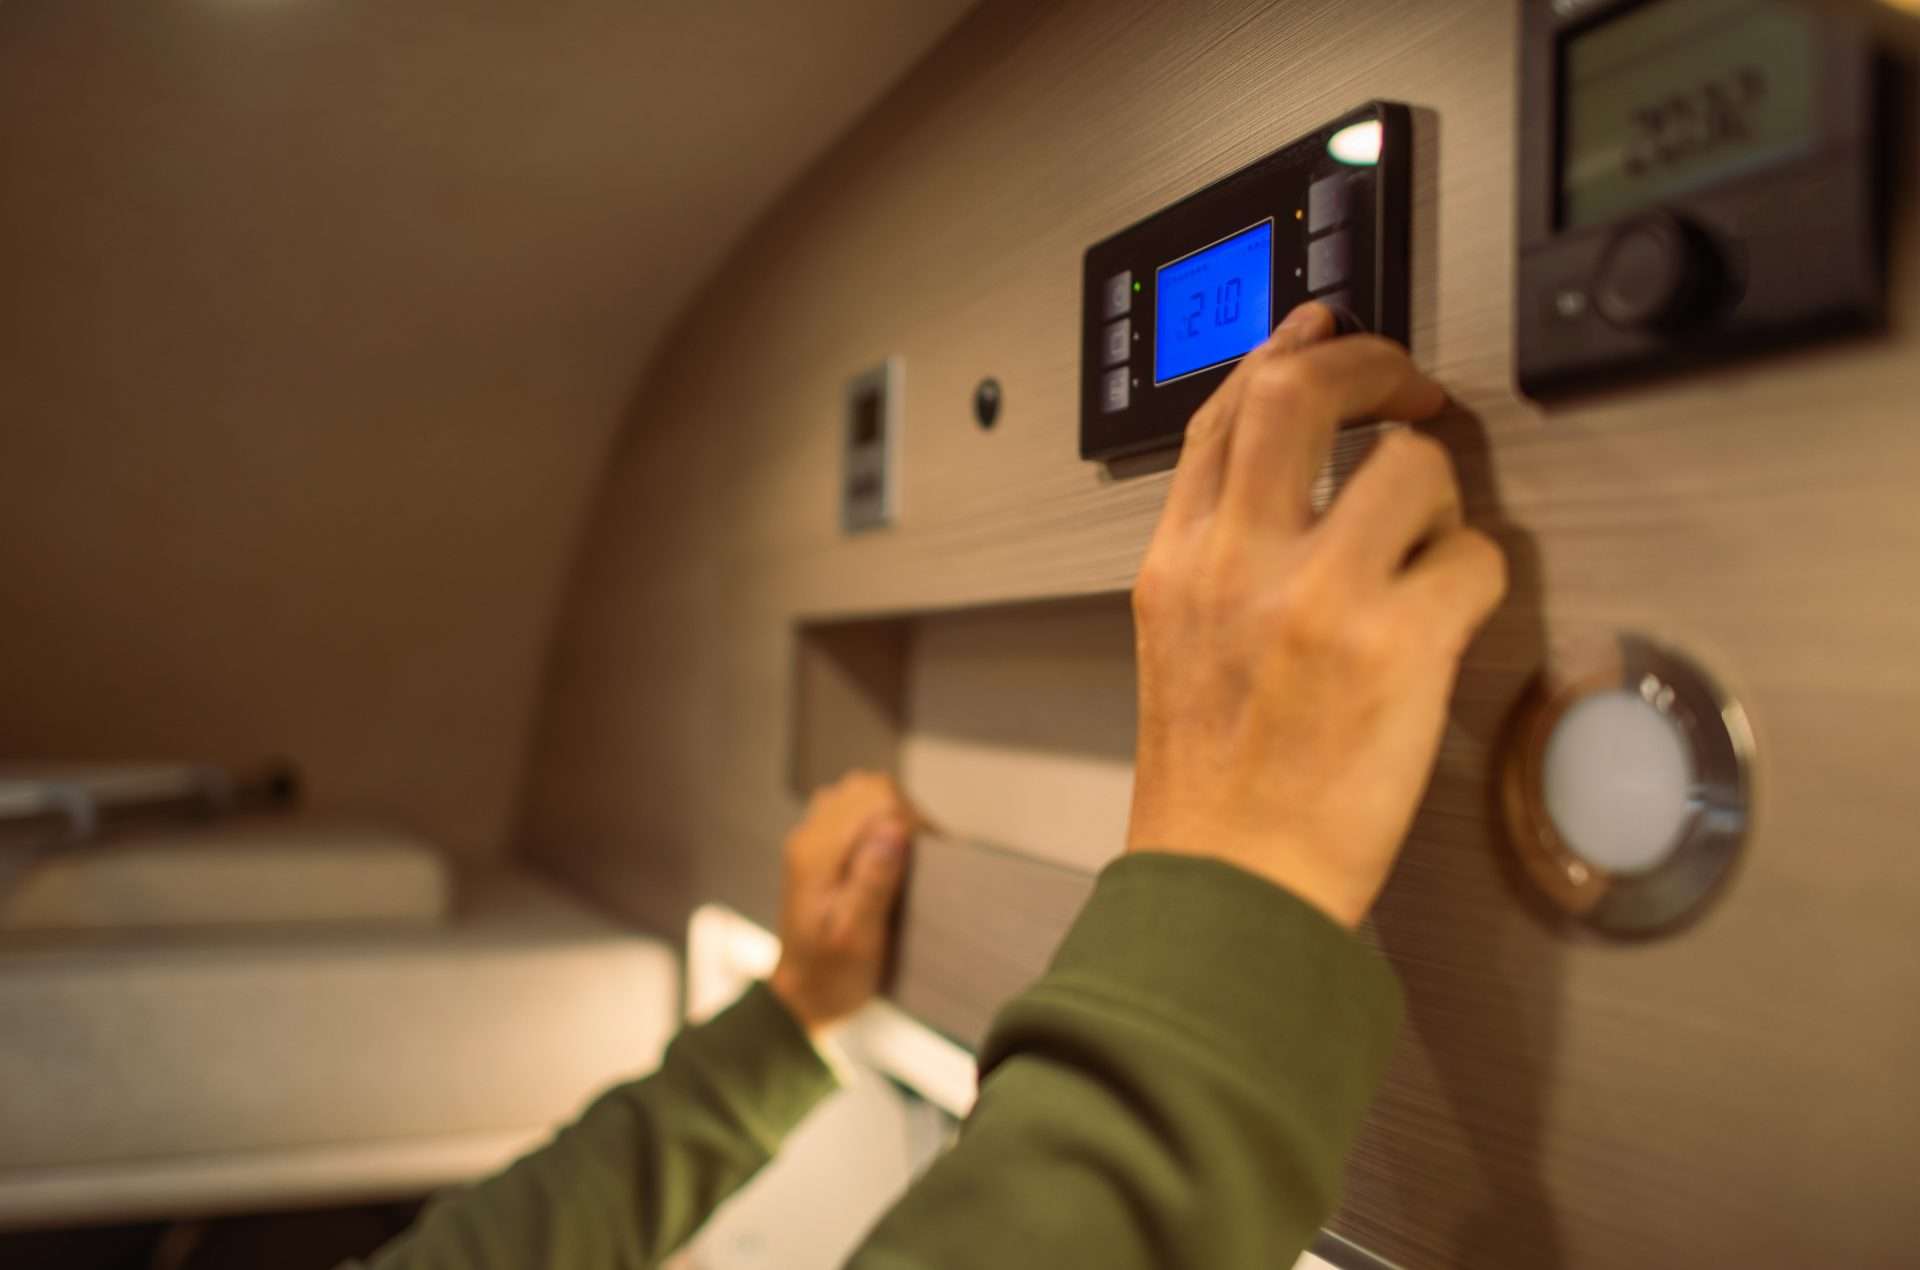 Man turning down temperature in RV